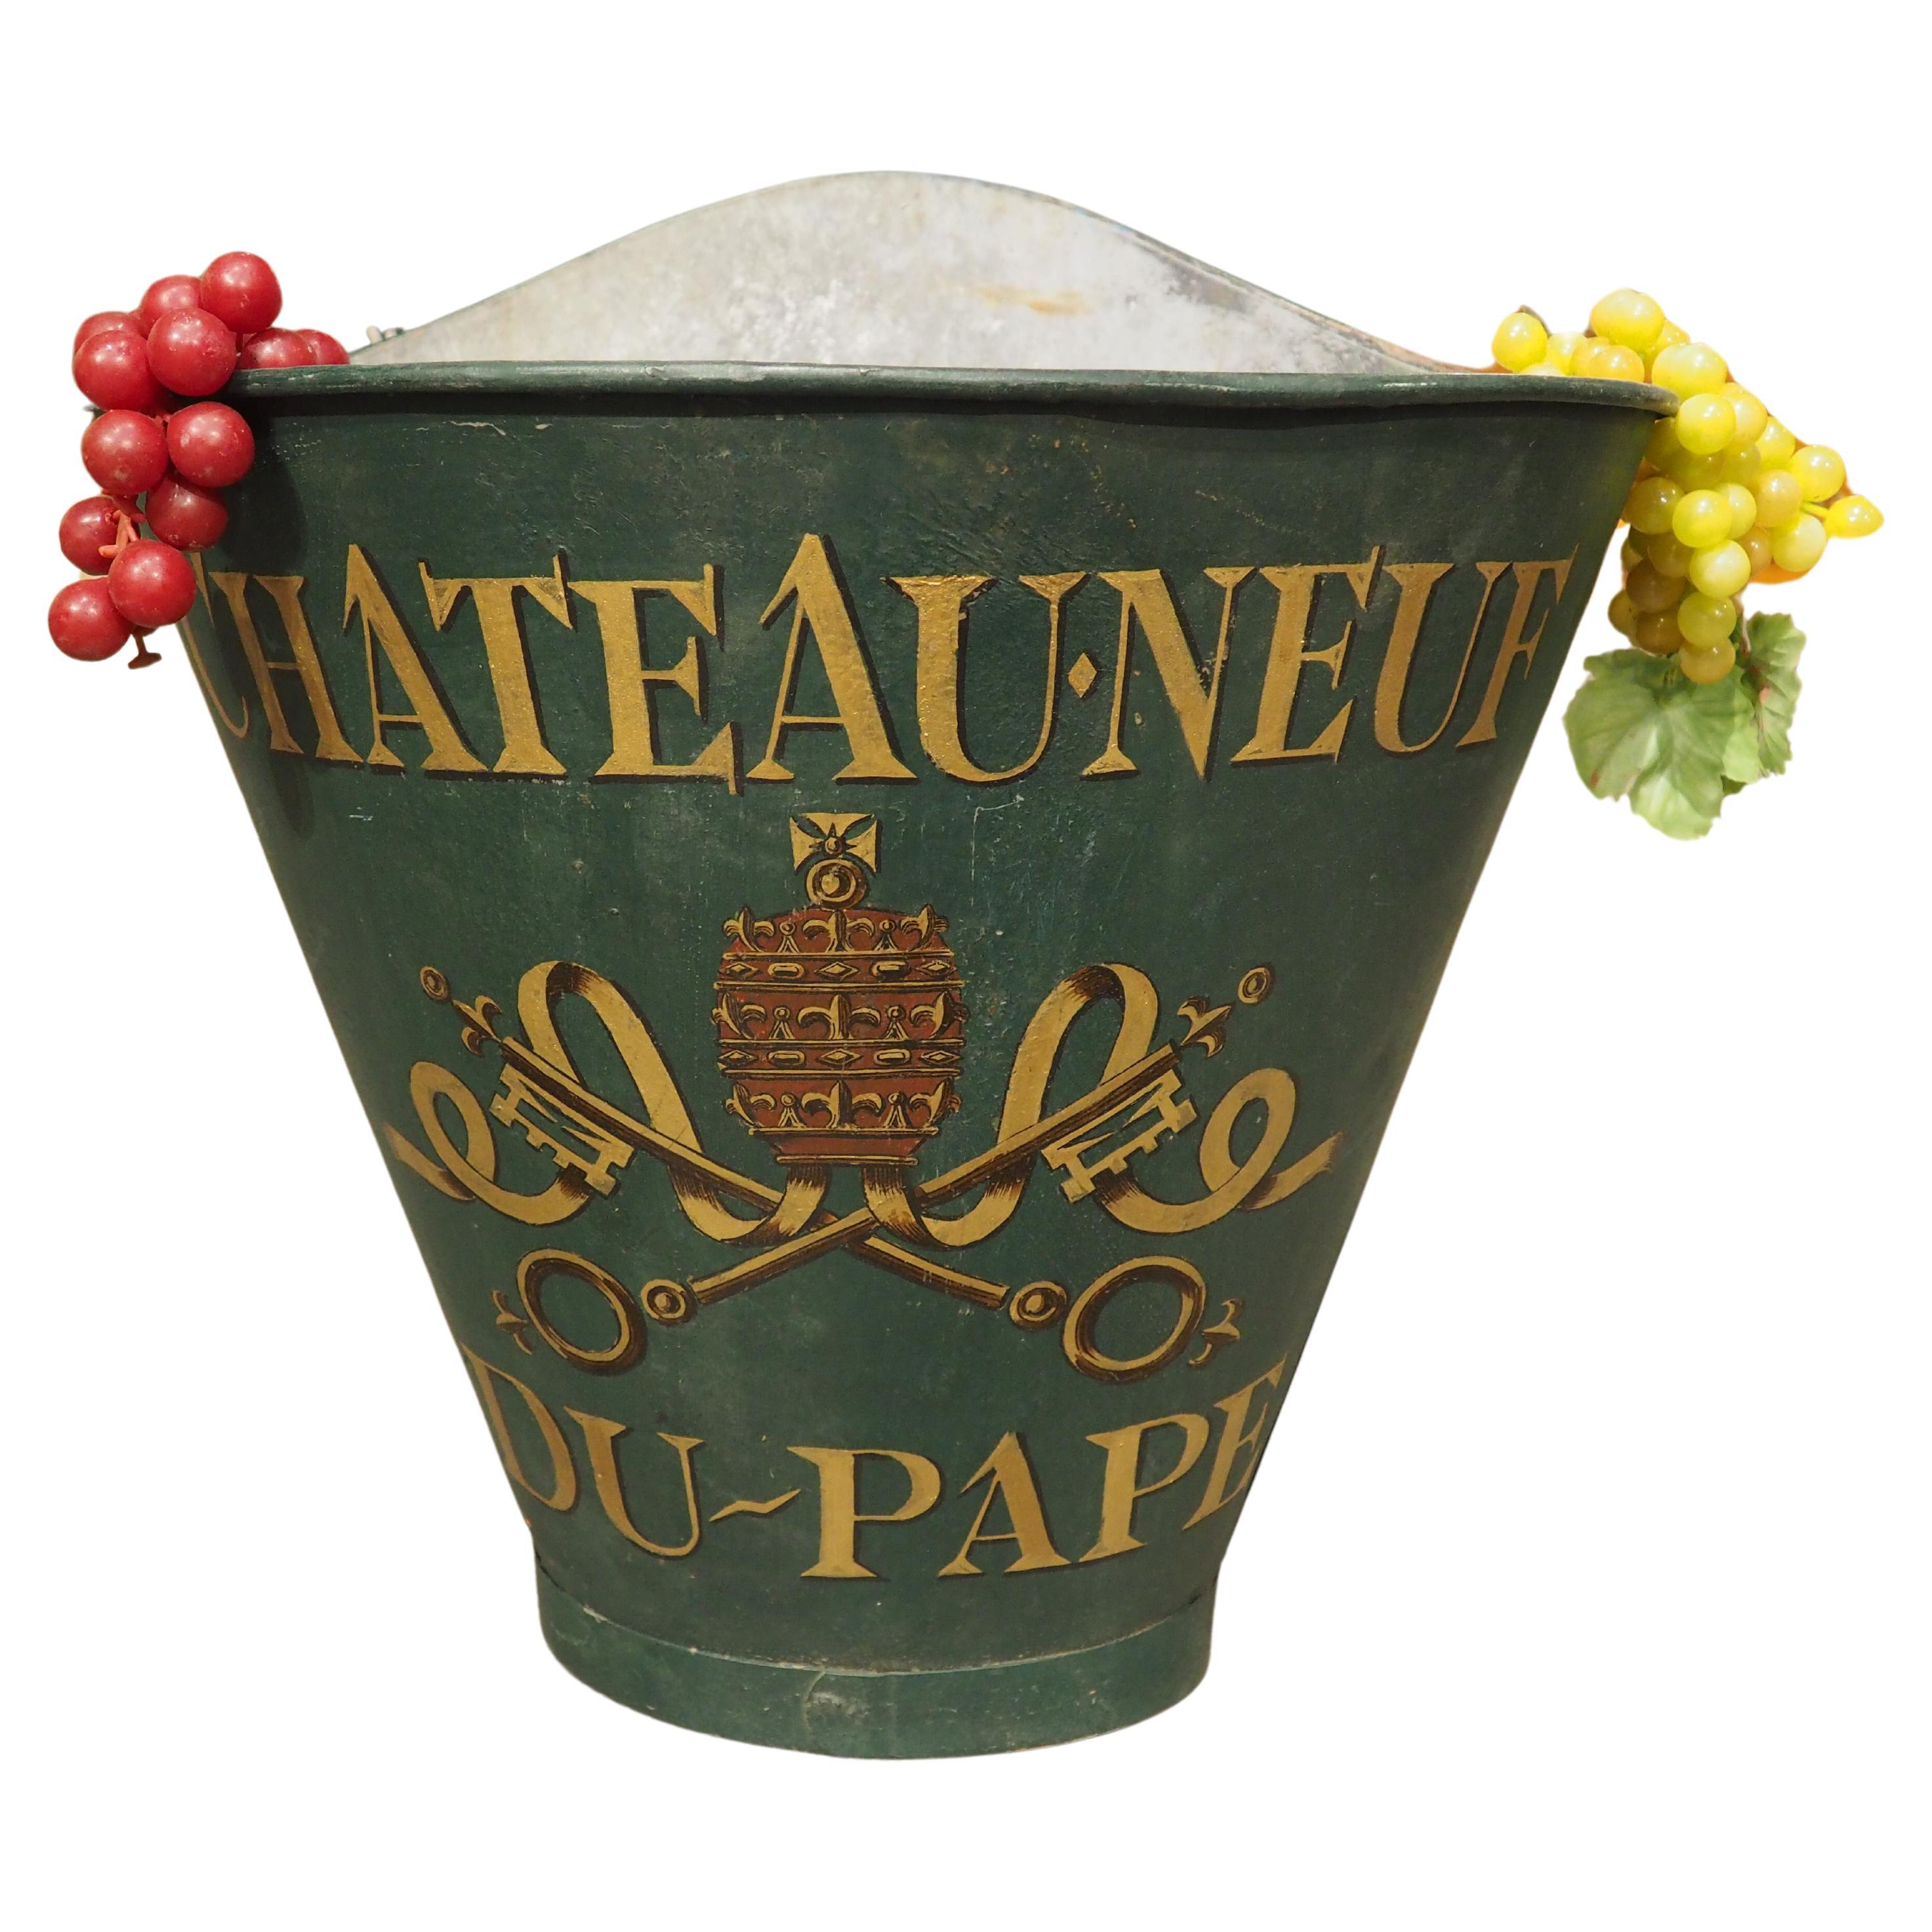 Antique Green Painted French Wine Hotte from the Haute-Garonne